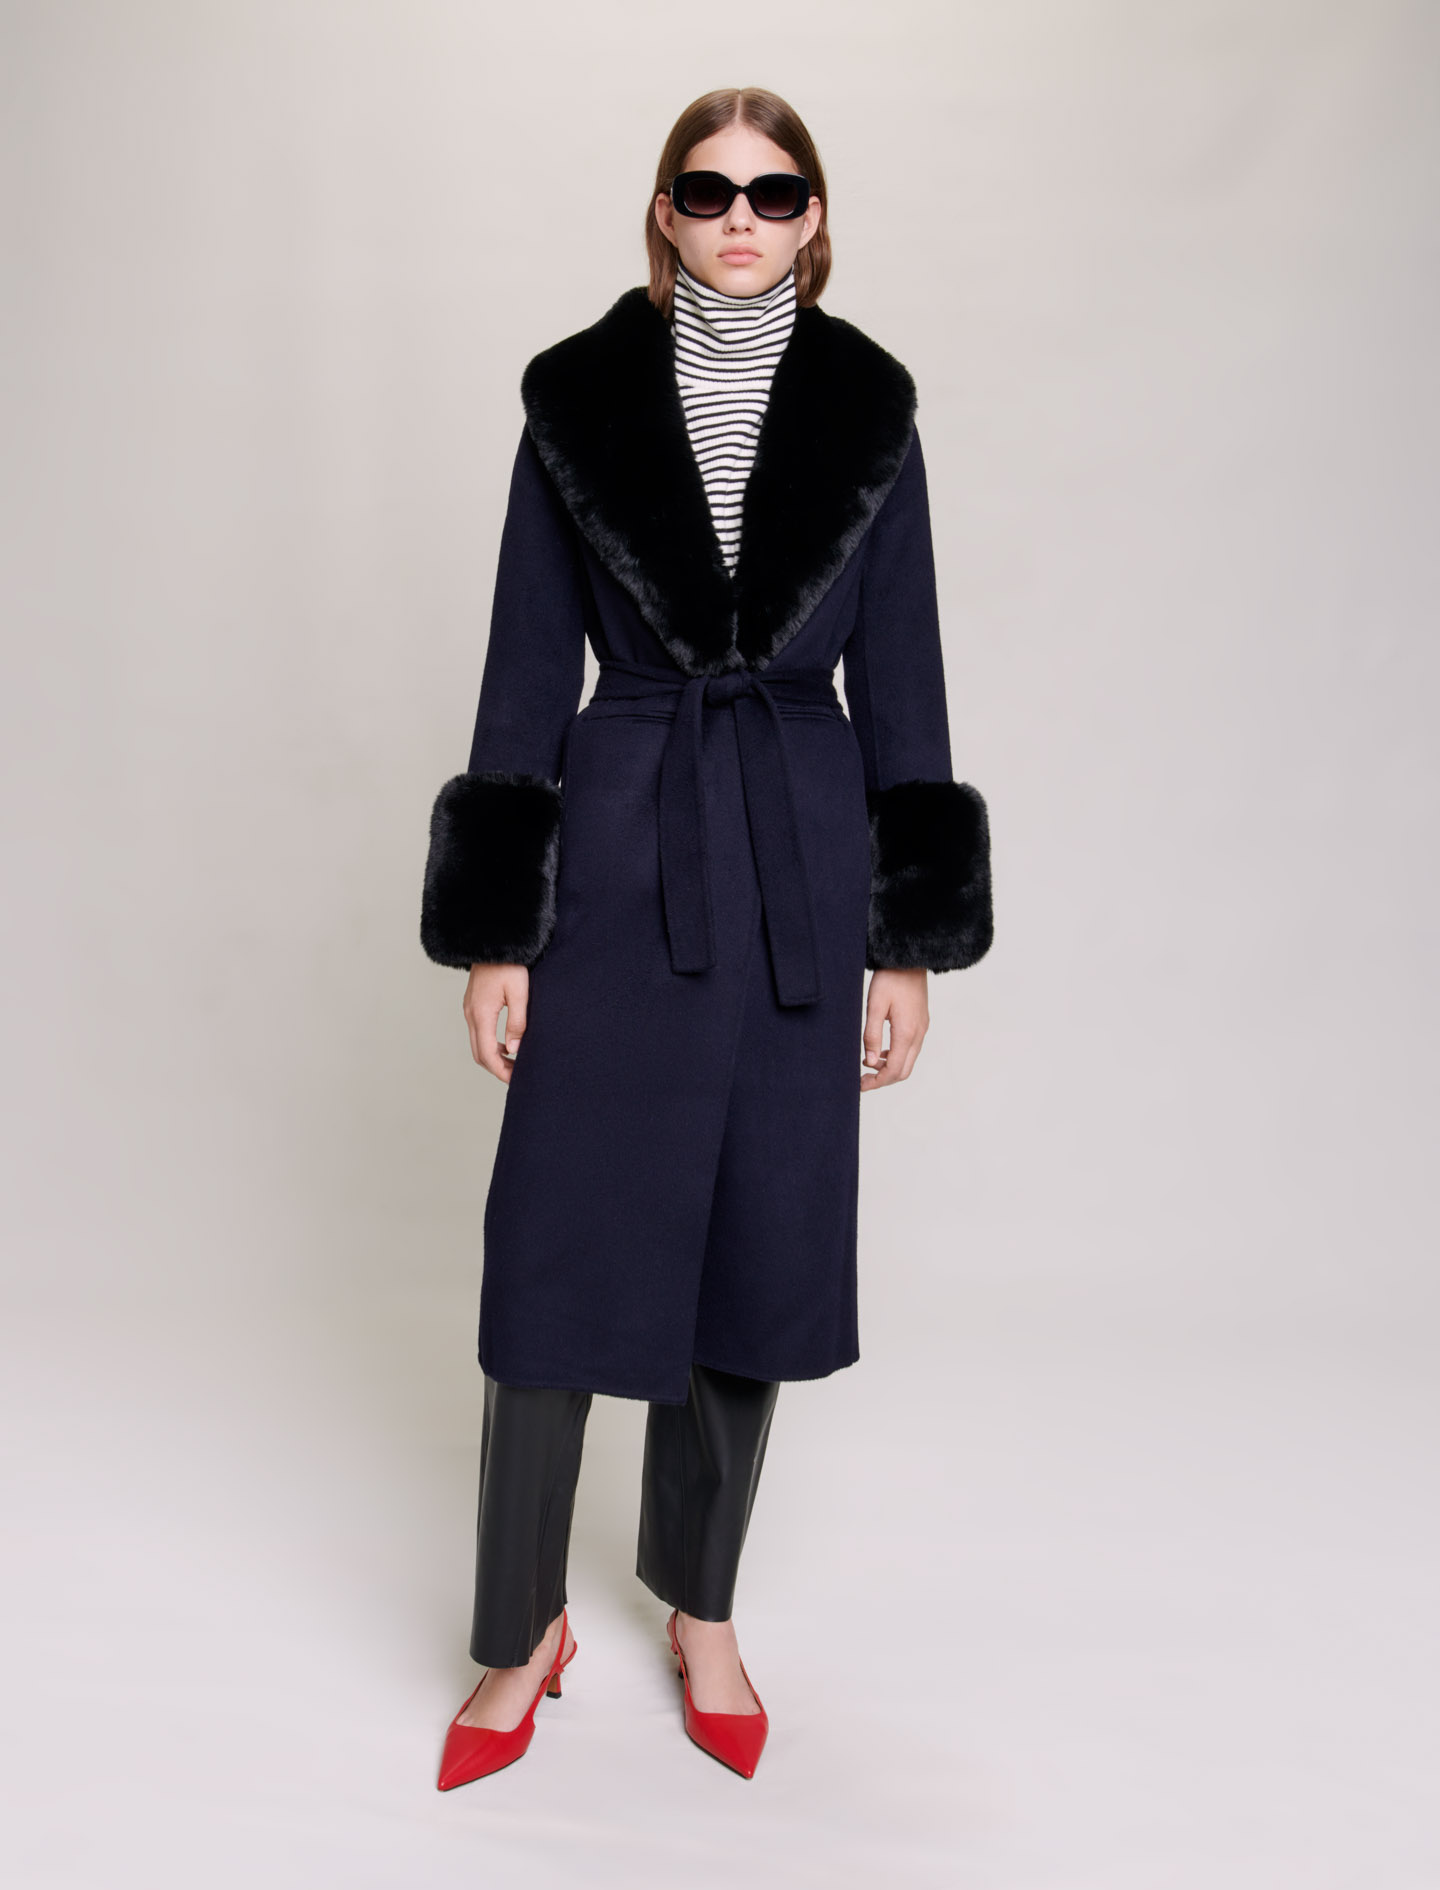 Maje Woman's wool, Double-faced faux fur coat for Fall/Winter, in color Navy / Blue